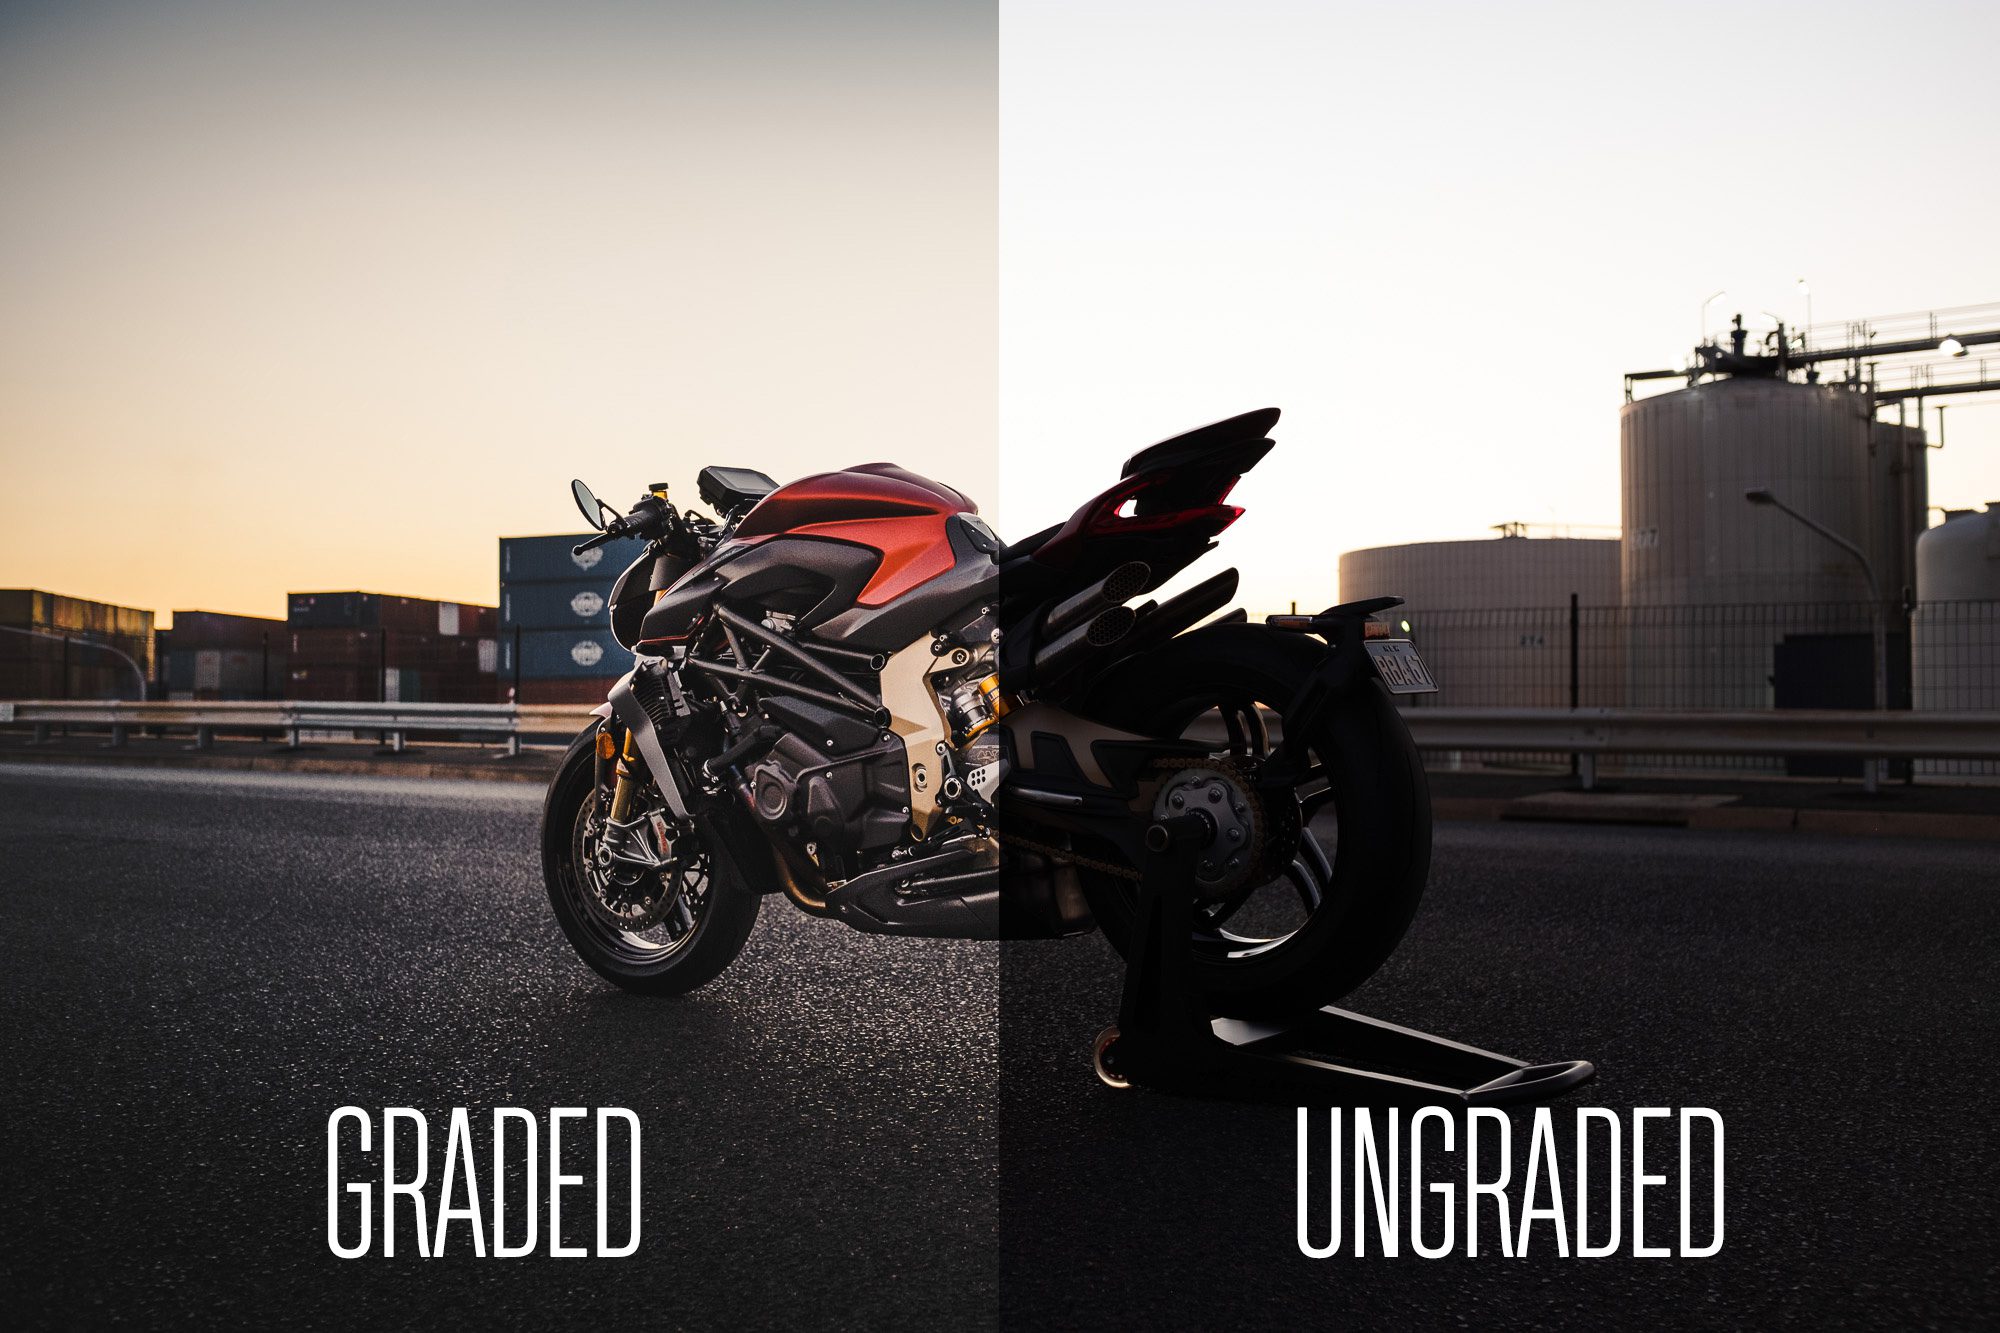 a comparison between a graded and ungraded photo of a motorcycle at sunset